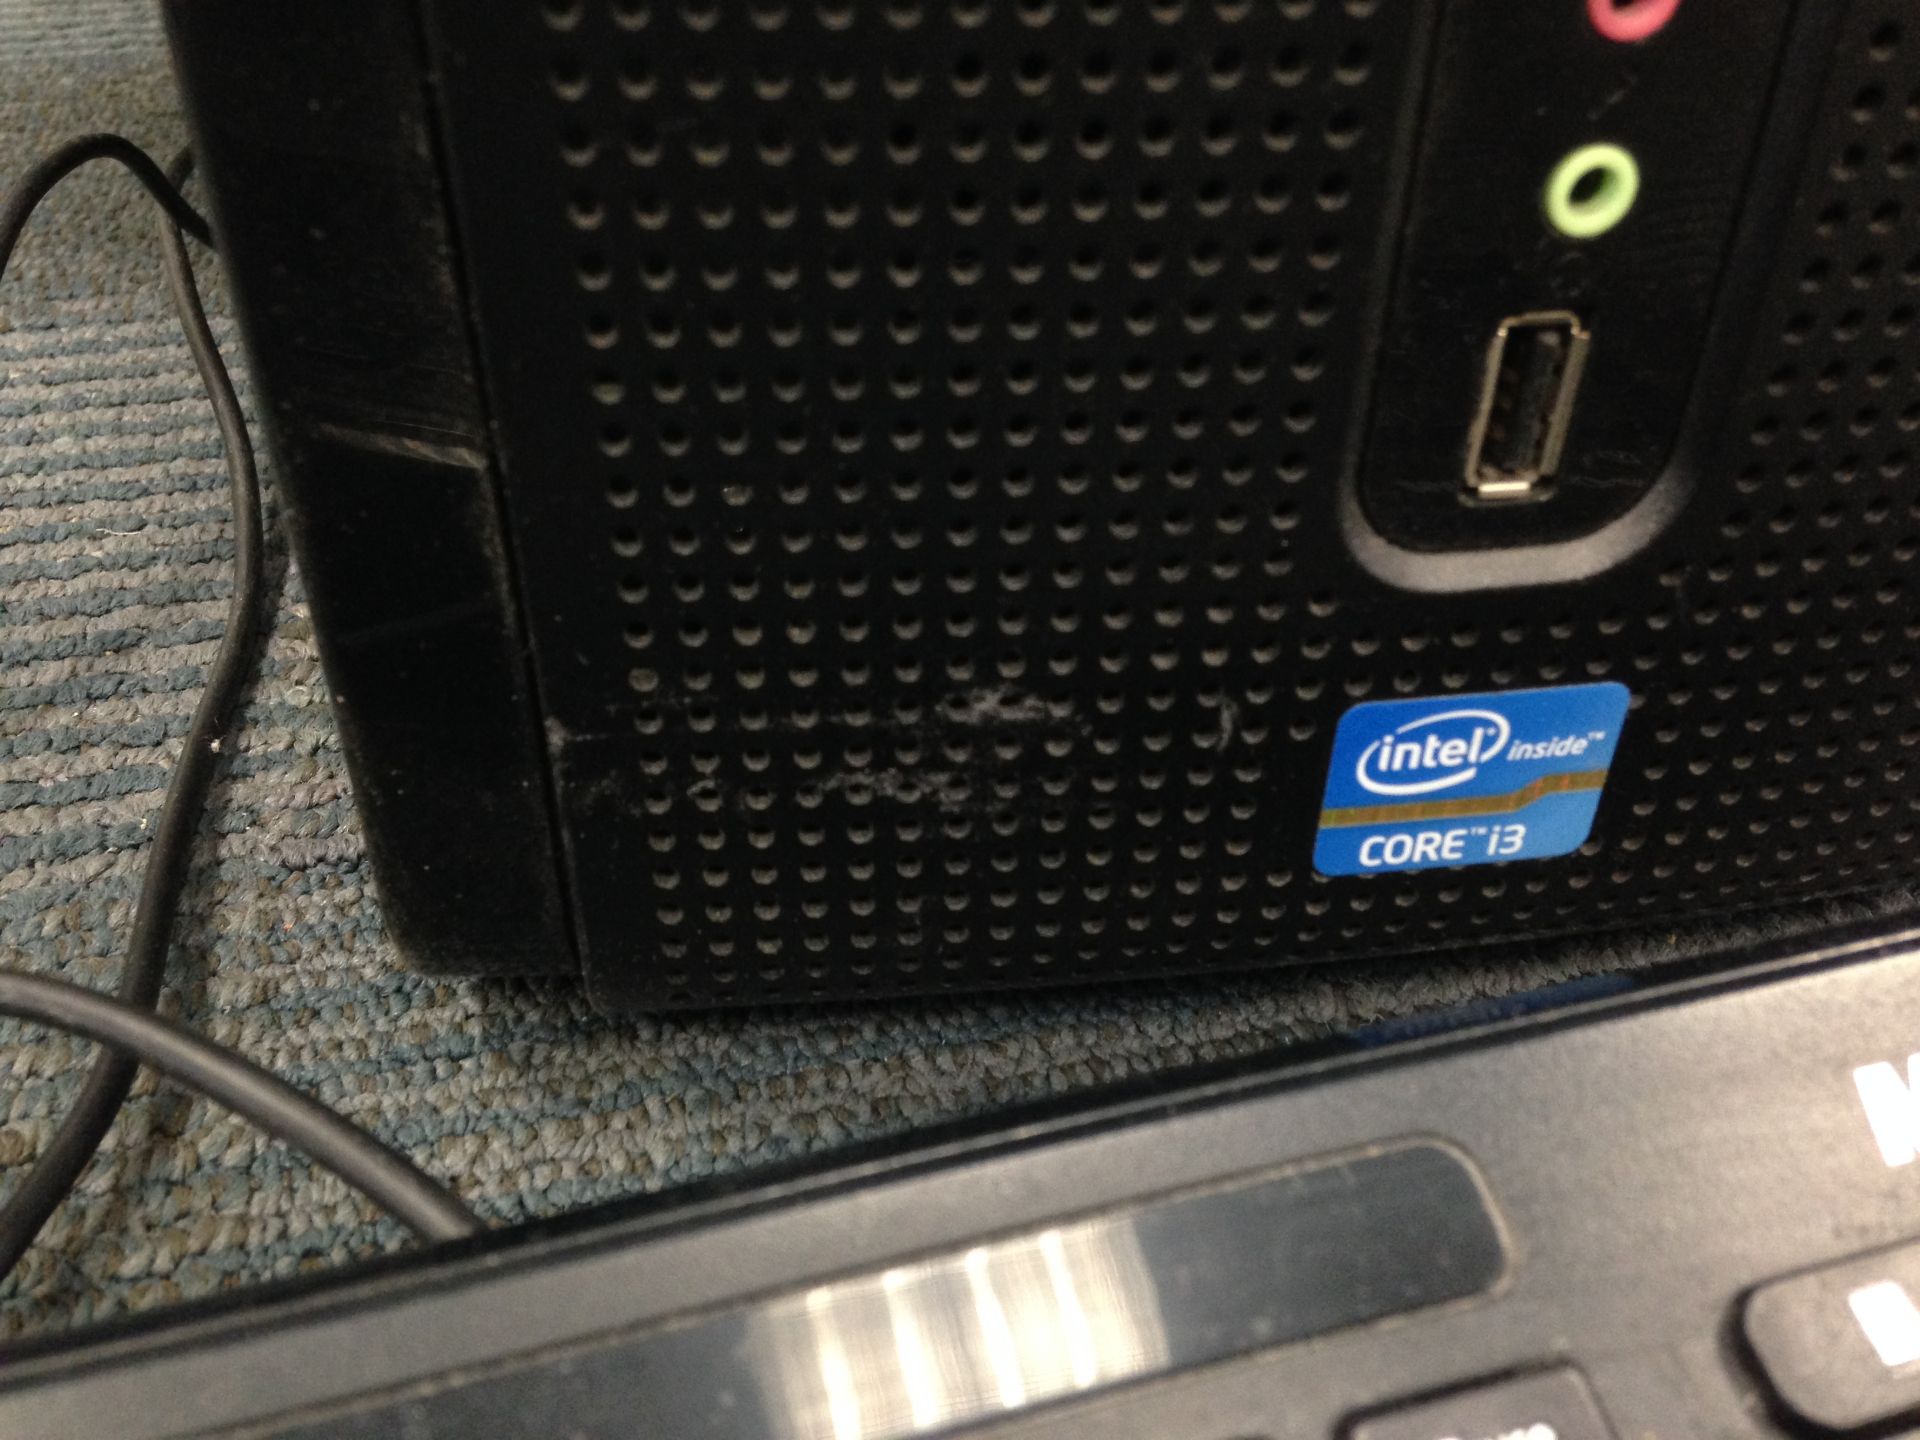 INTEL INSIDE CORE I3 WITH SCREEN KEYBOARD MOUSE - Image 2 of 3